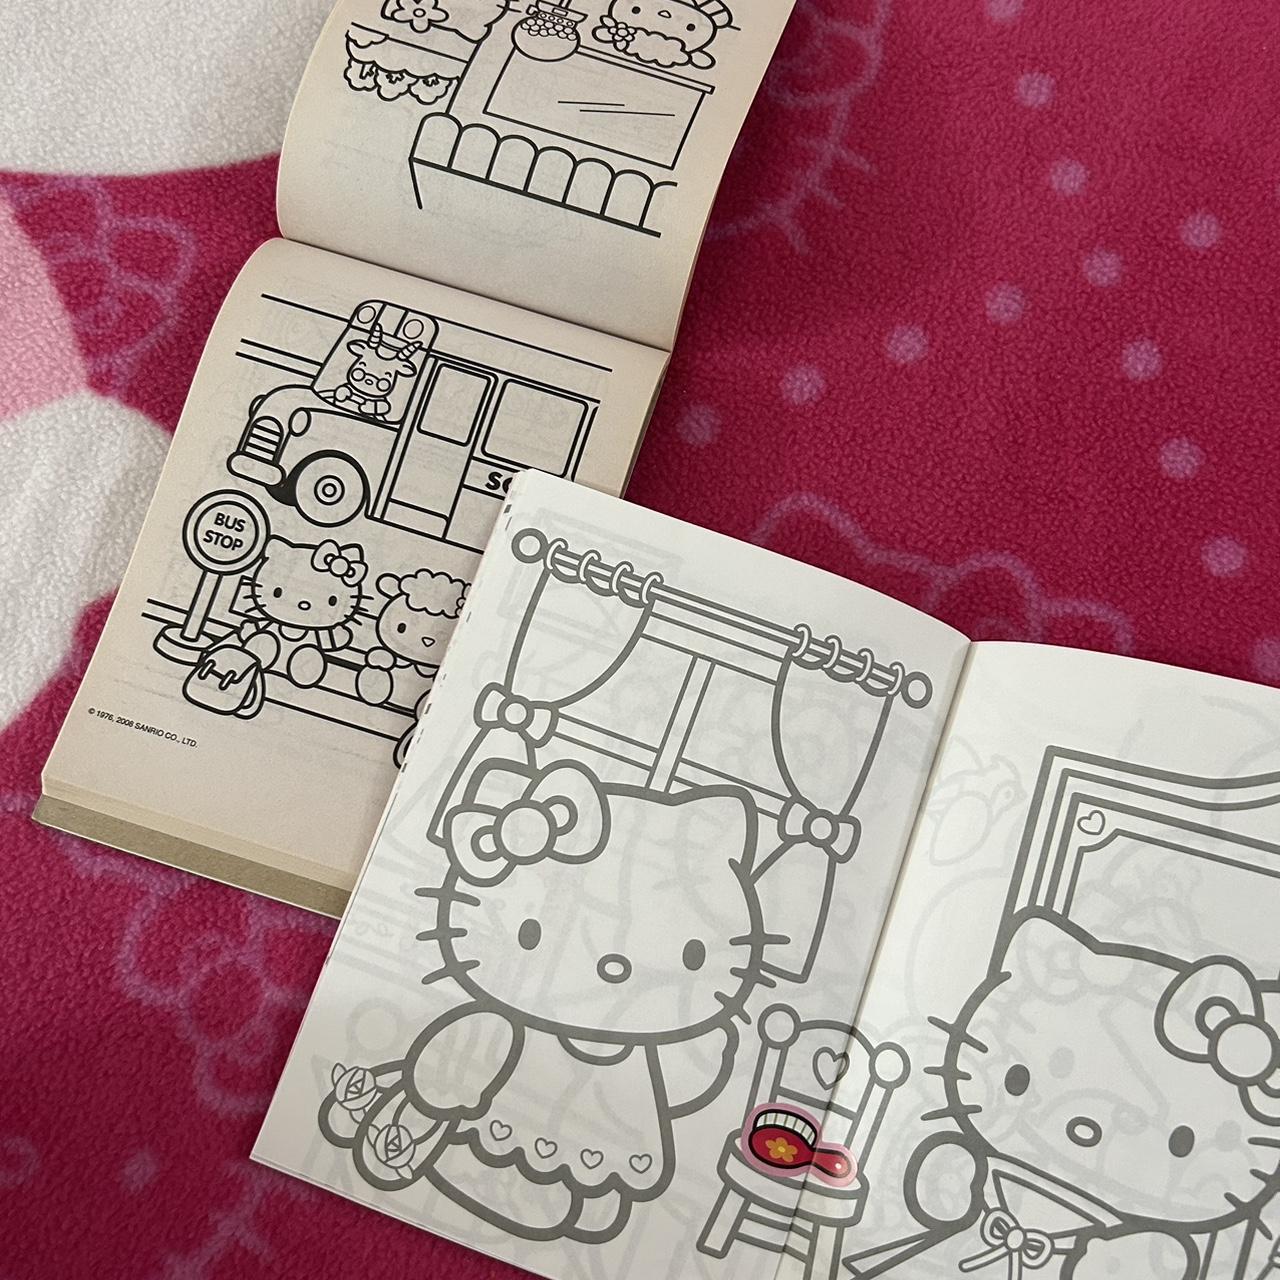 Hello kitty 1987 coloring book with stickers Only - Depop